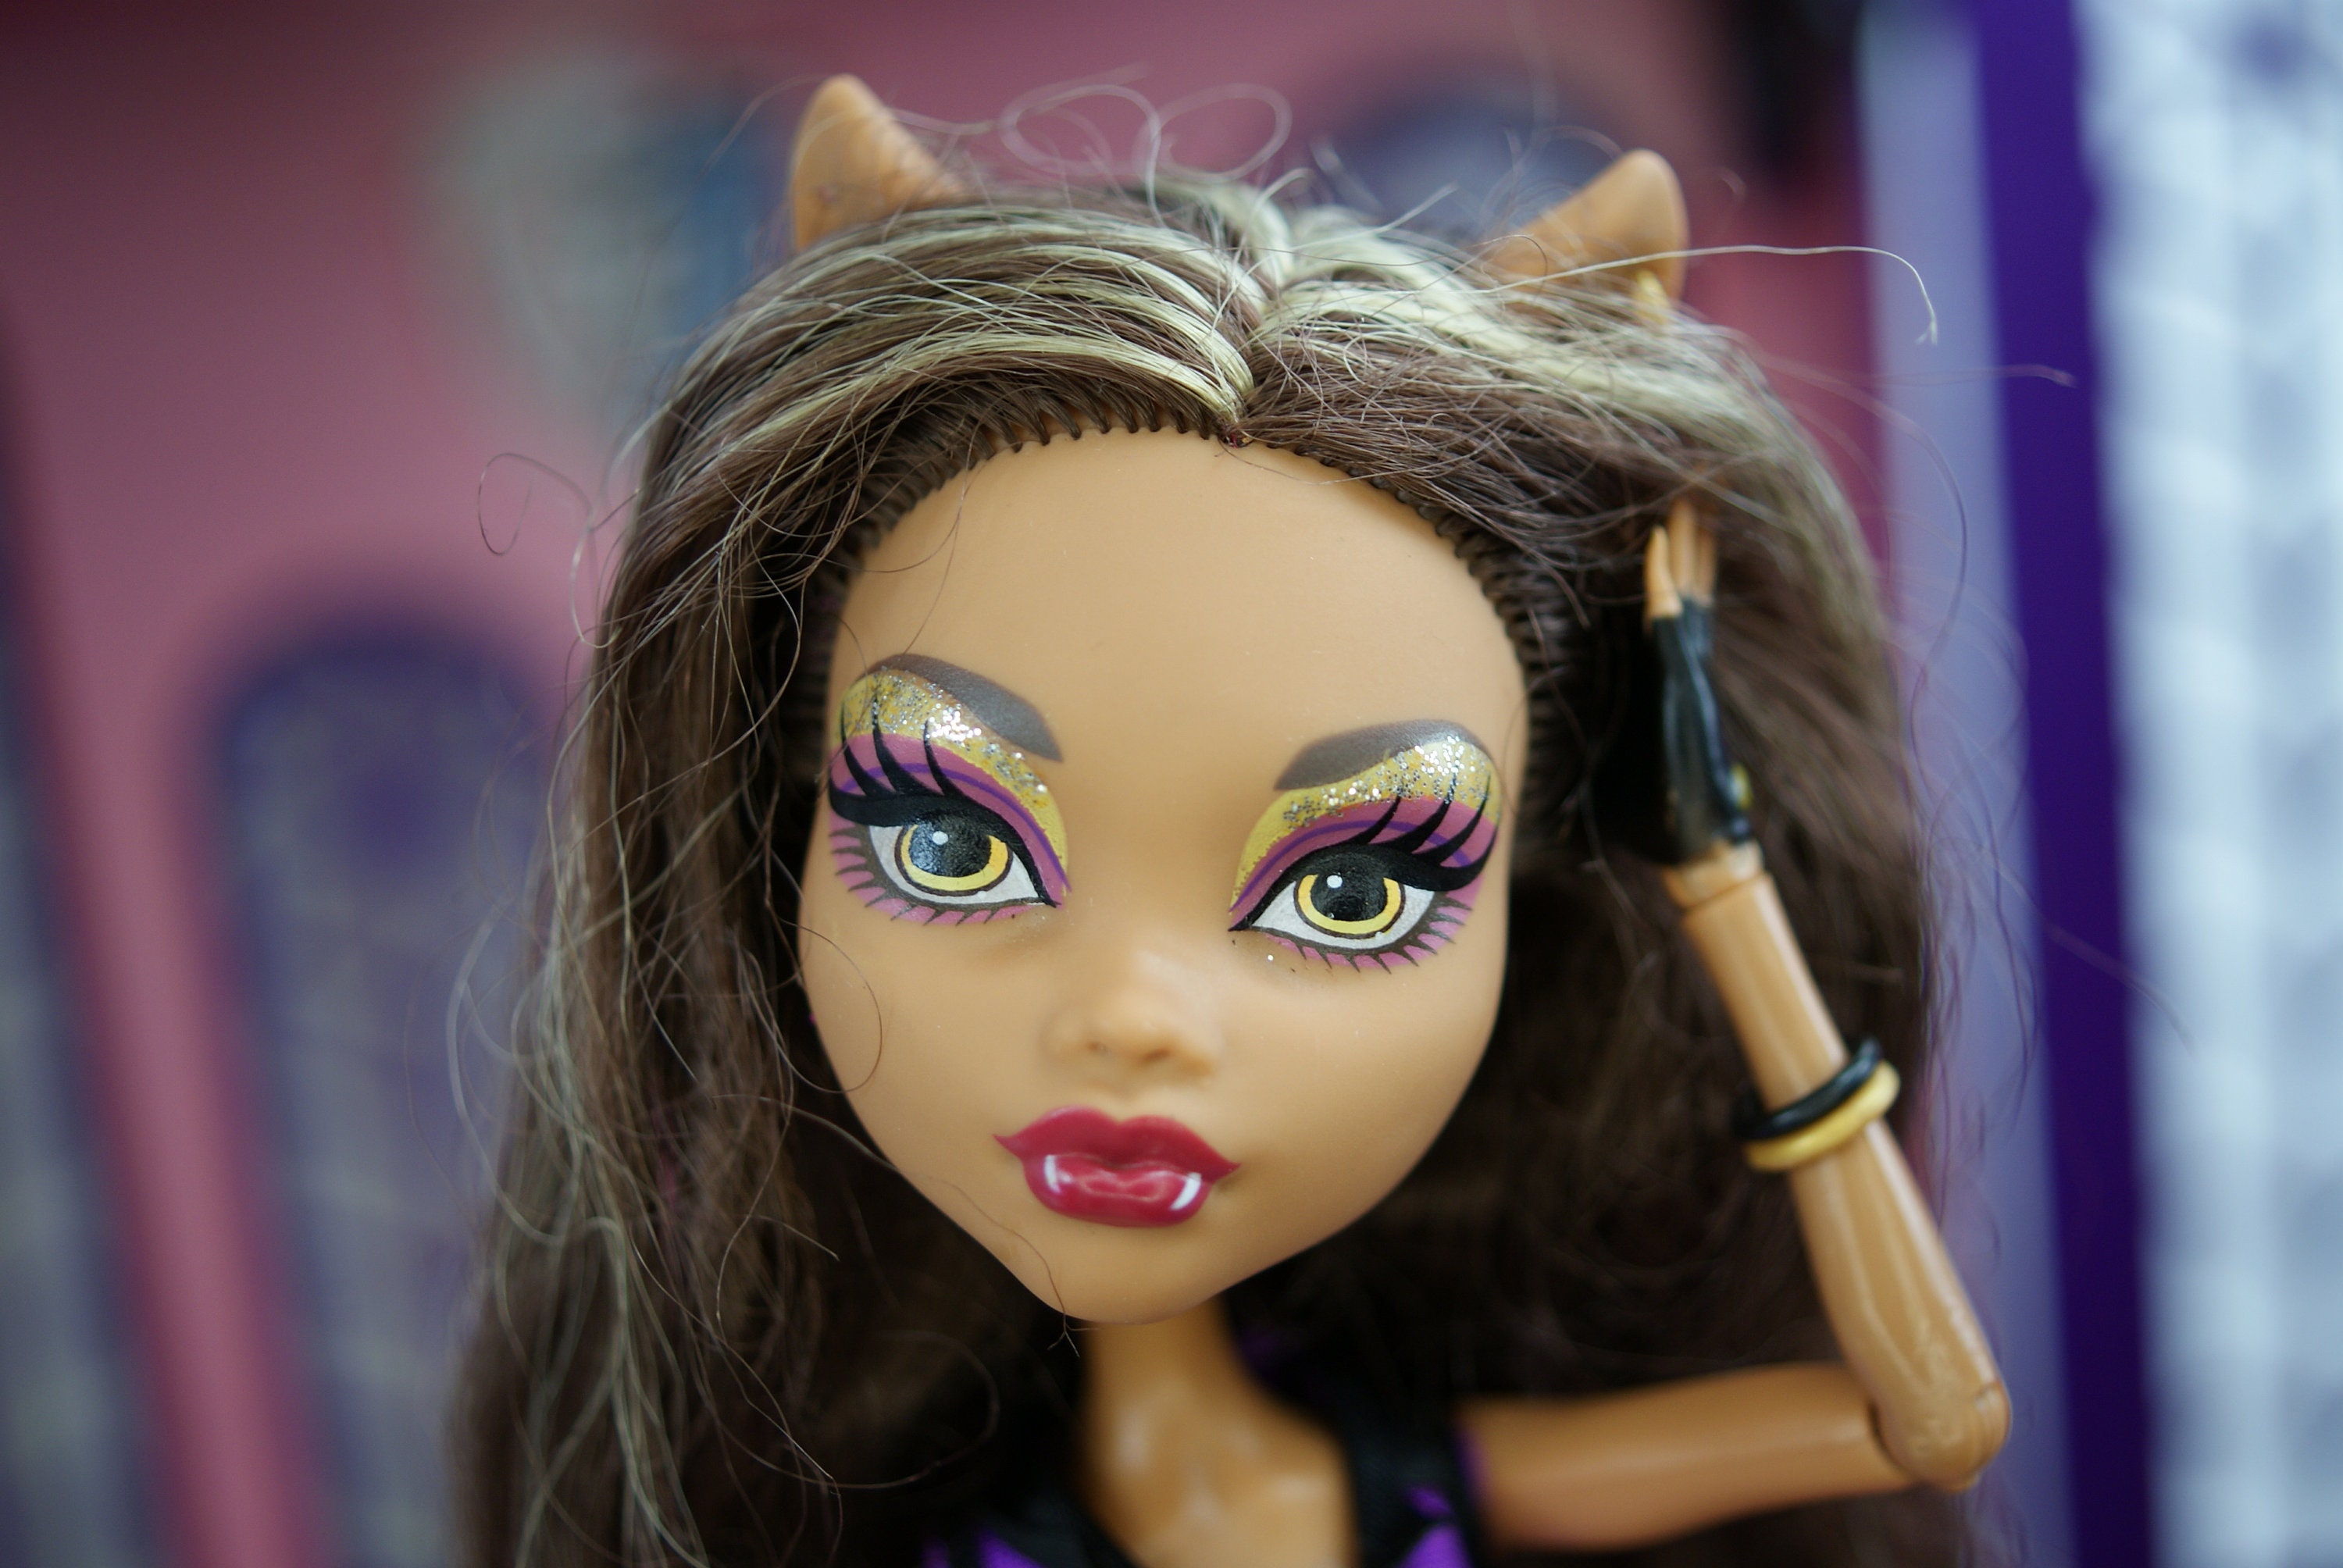 EVENT #6: Monster High Doll Sales Rise While Barbie's Plummet